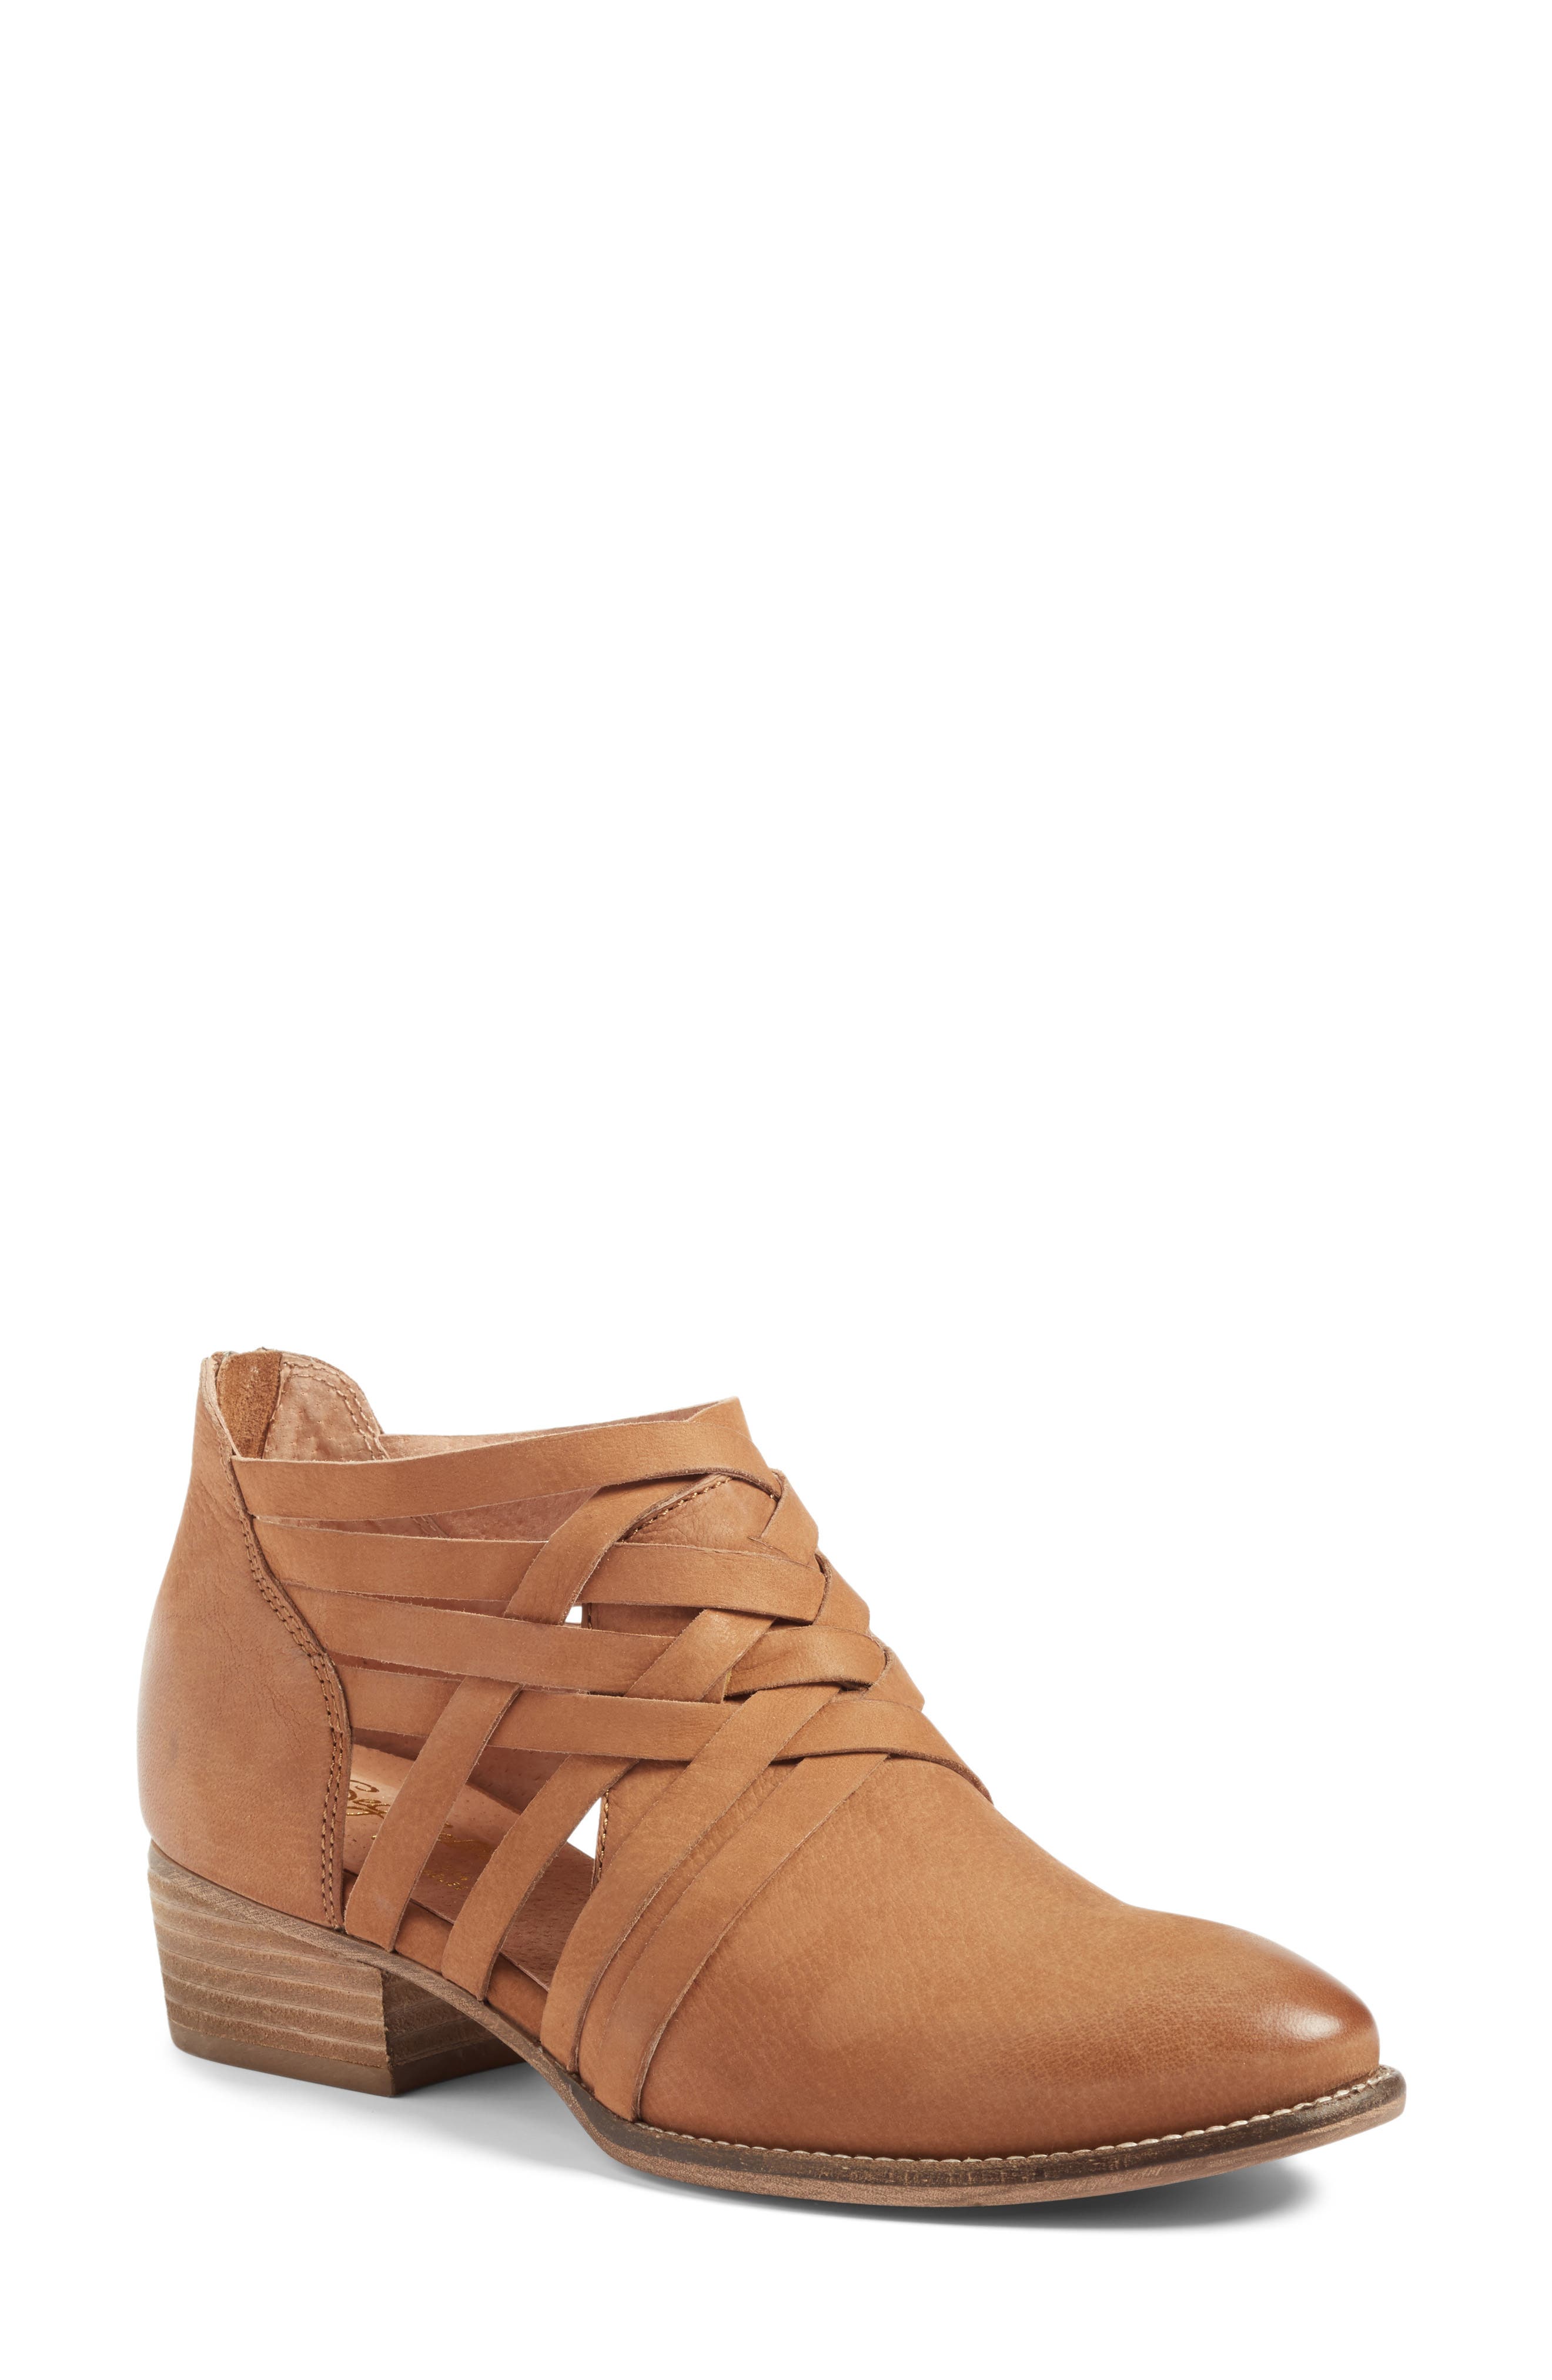 seychelles woven ankle boots